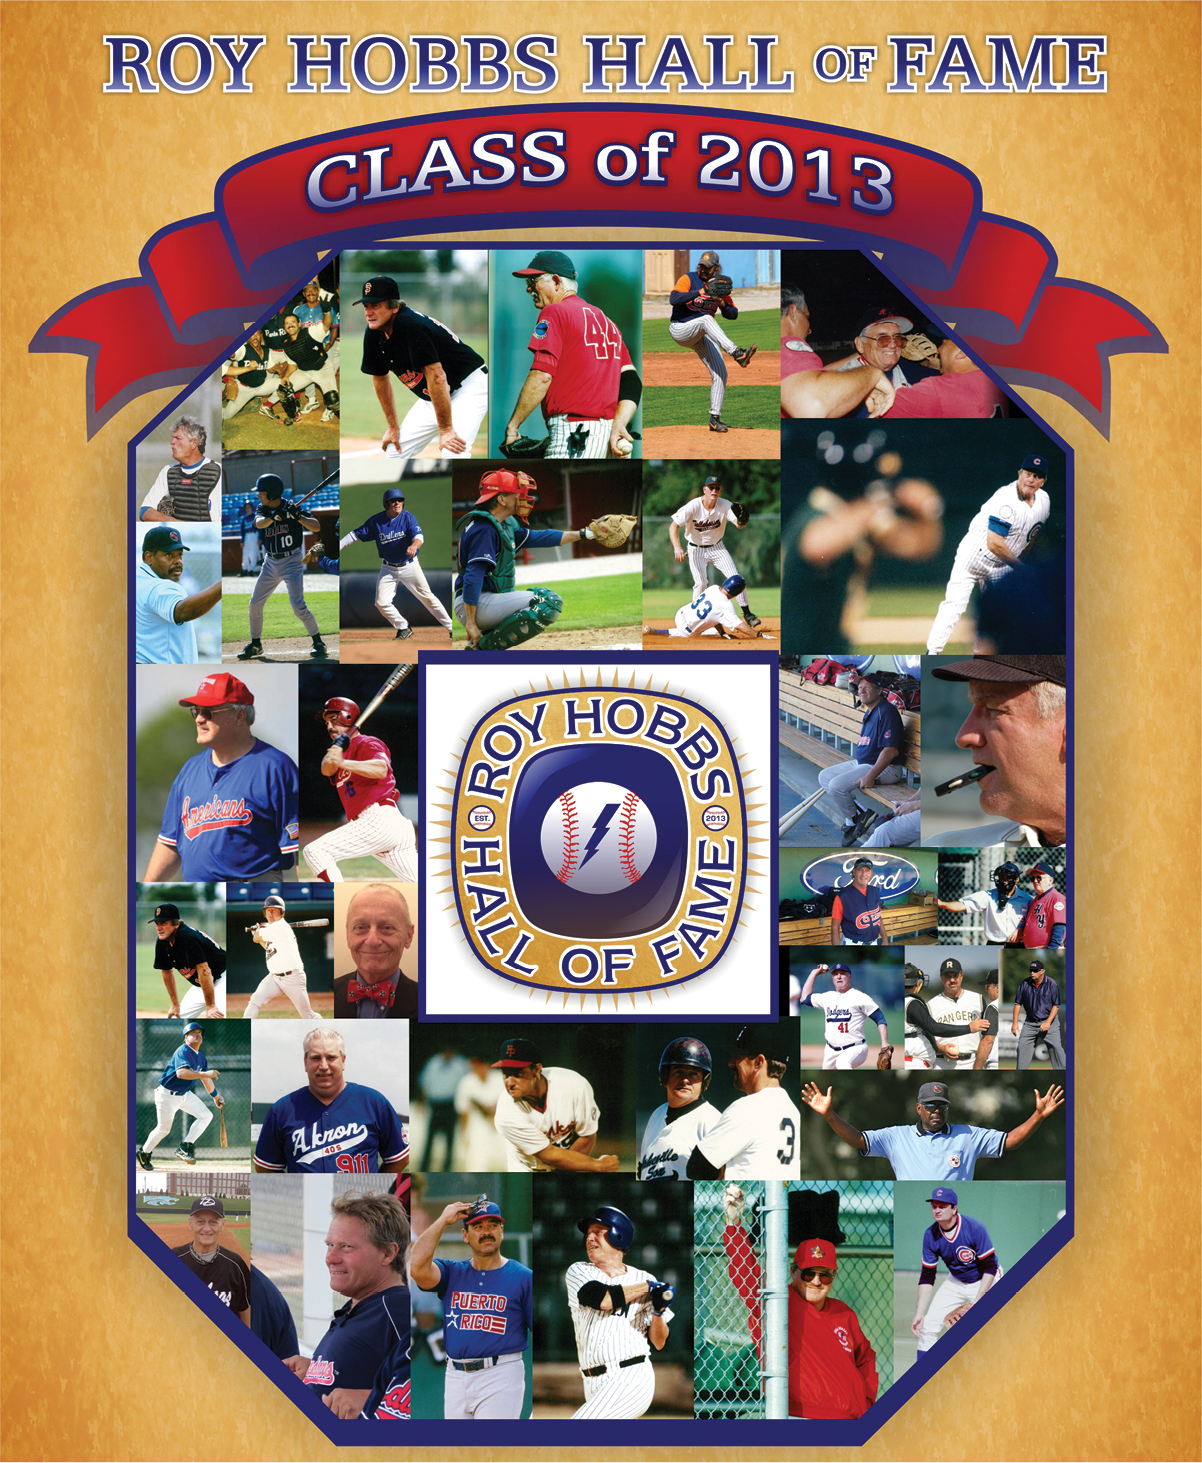 Roy Hobbs Hall of Fame 2013 Collage